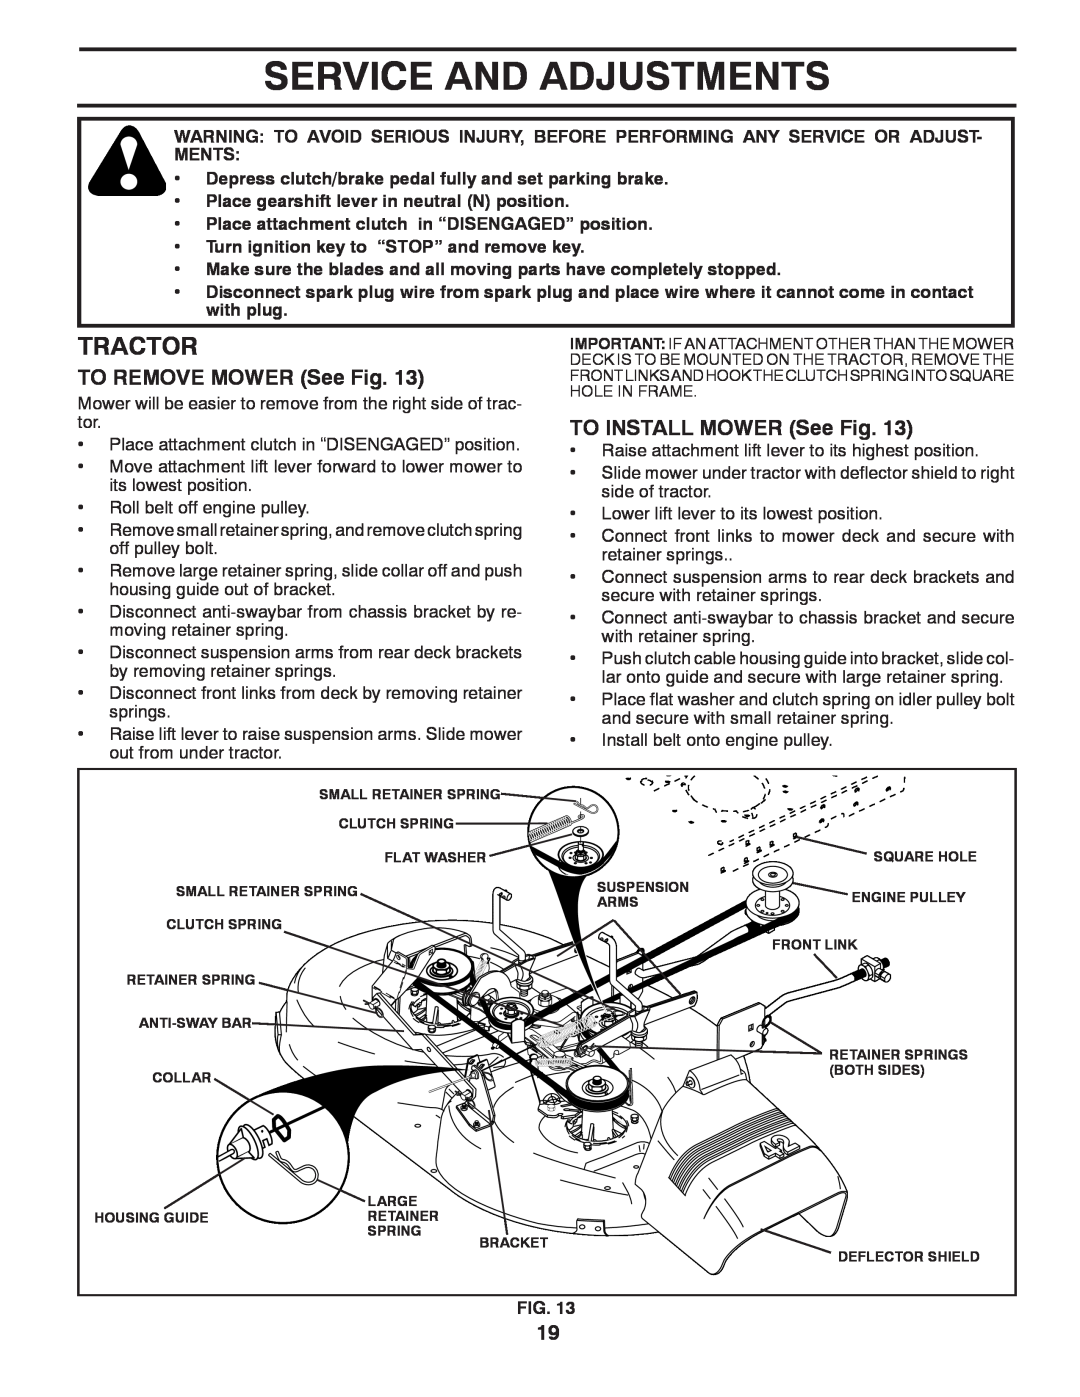 Murray 96017000500 manual Service And Adjustments, TO REMOVE MOWER See Fig, TO INSTALL MOWER See Fig, Tractor 